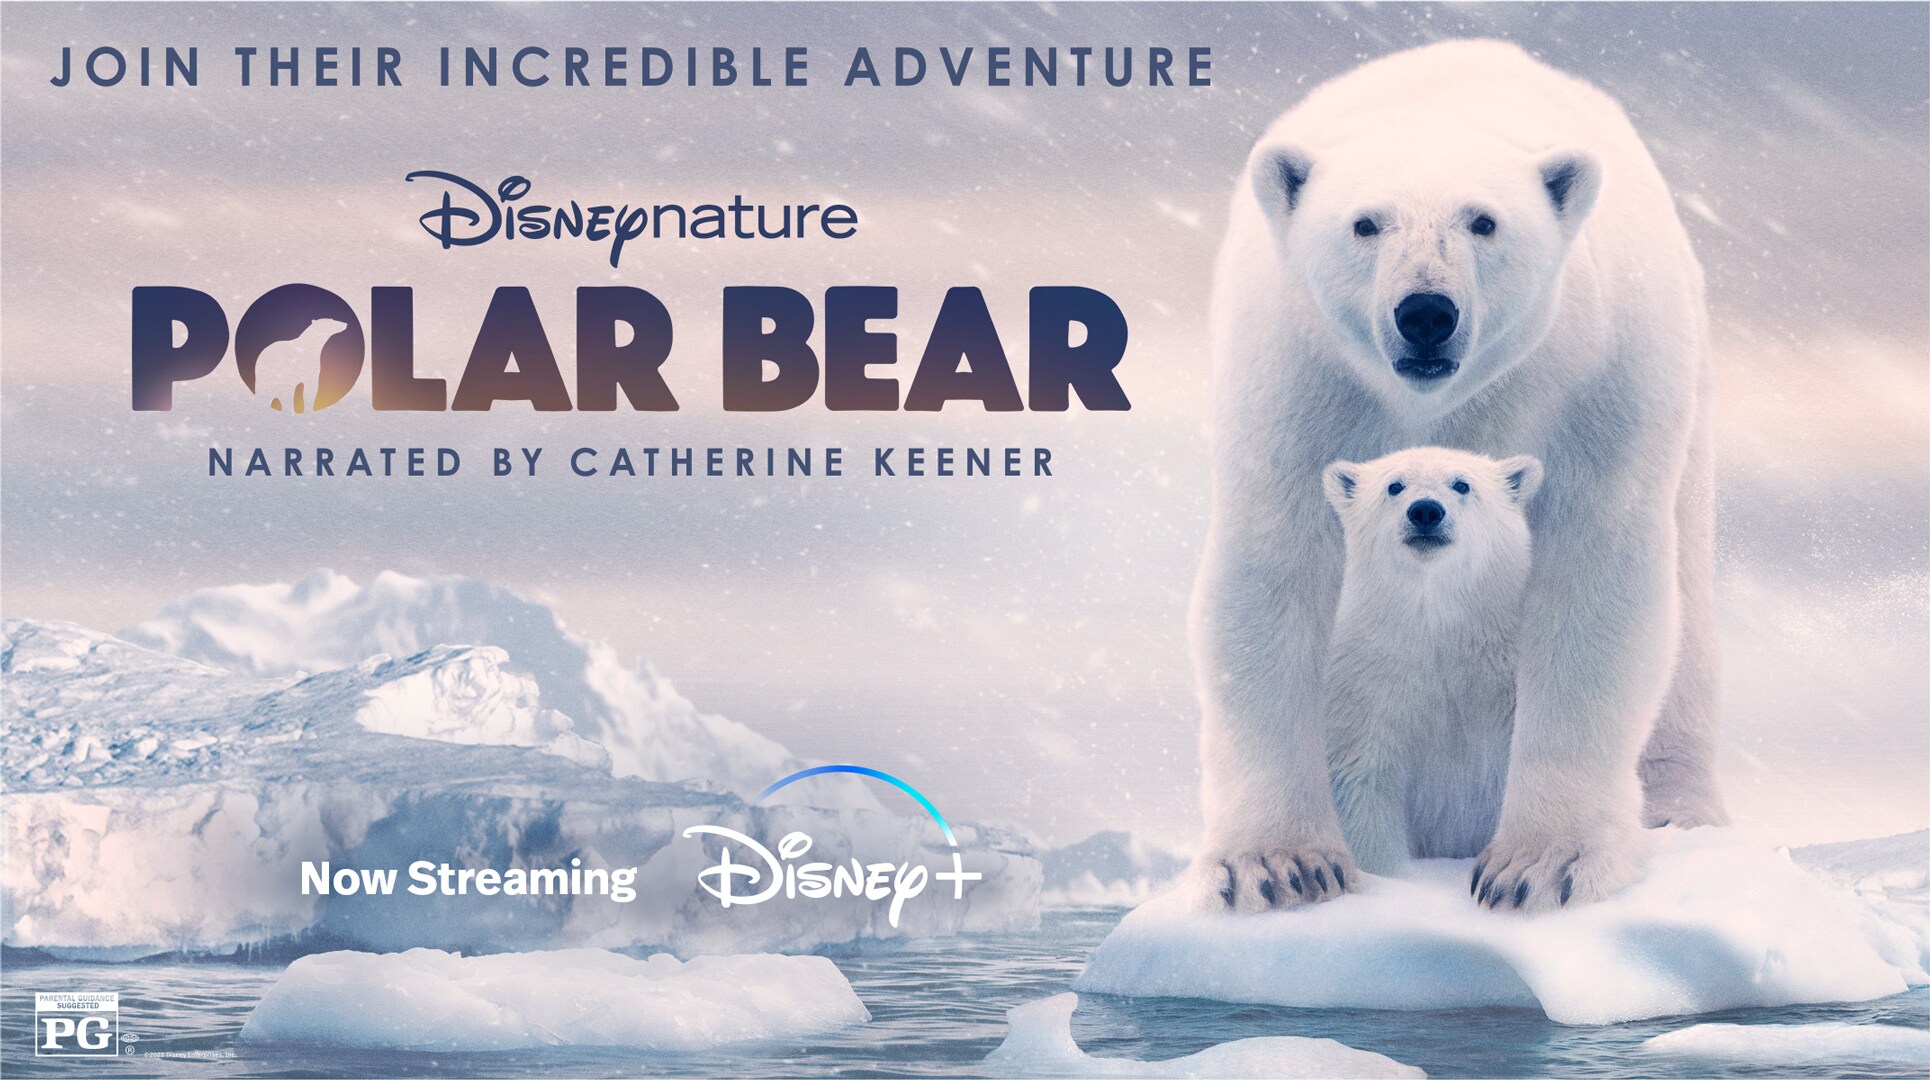 A mother polar bear shelters her child between her legs while standing on an iceberg on the poster for Polar Bear